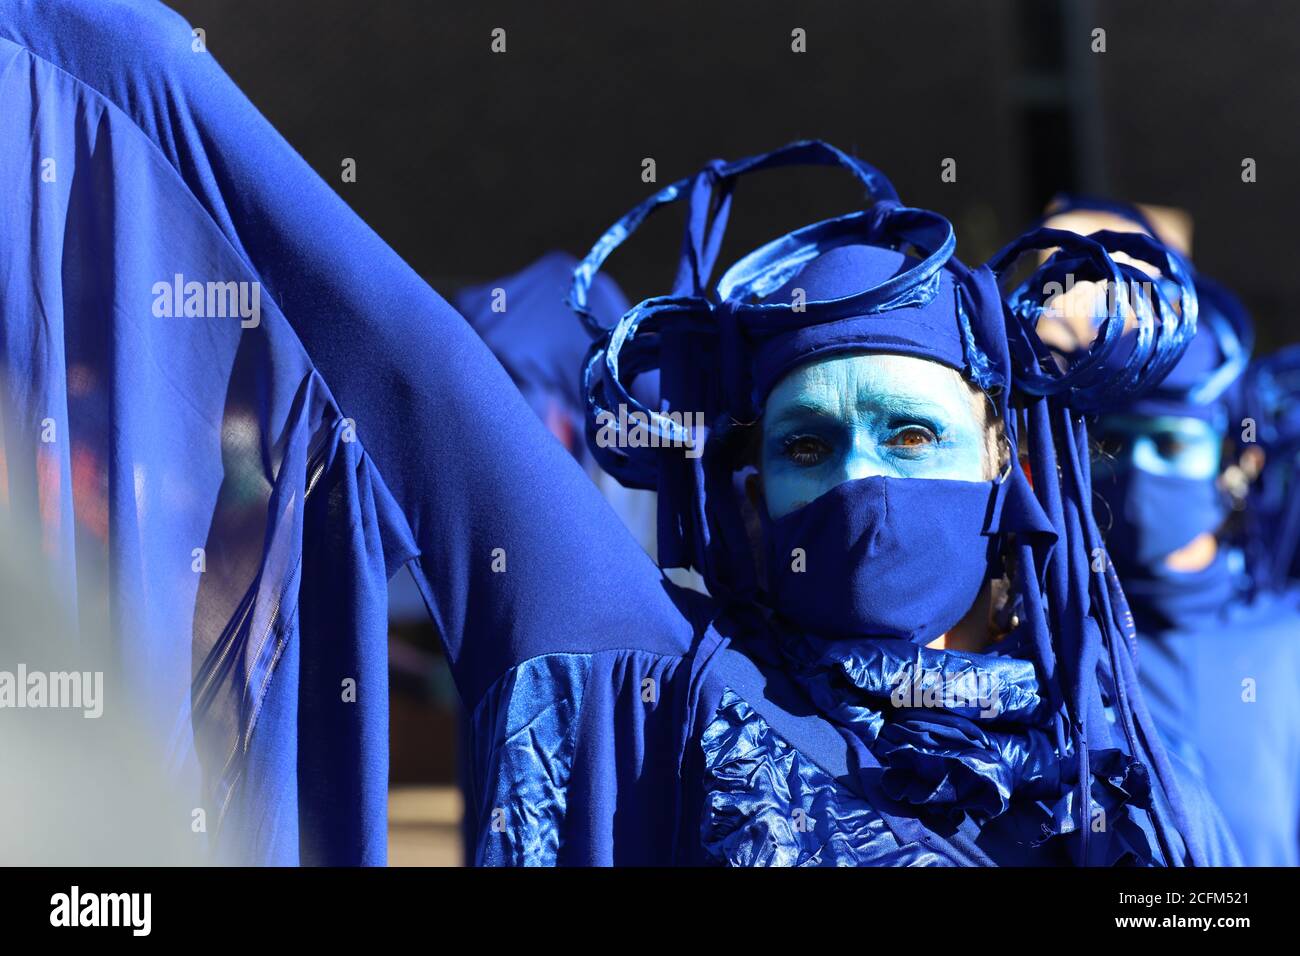 London, UK. 06th Sep, 2020. Extinction Rebellion protestors march from Parliament Square to Tate Modern to highlight the dangers to marine life from global warming and climate change, 6th September 2020. Protestors dressed in blue referred to as 'the wave' move in wave formation through the streets Credit: Denise Laura Baker/Alamy Live News Stock Photo